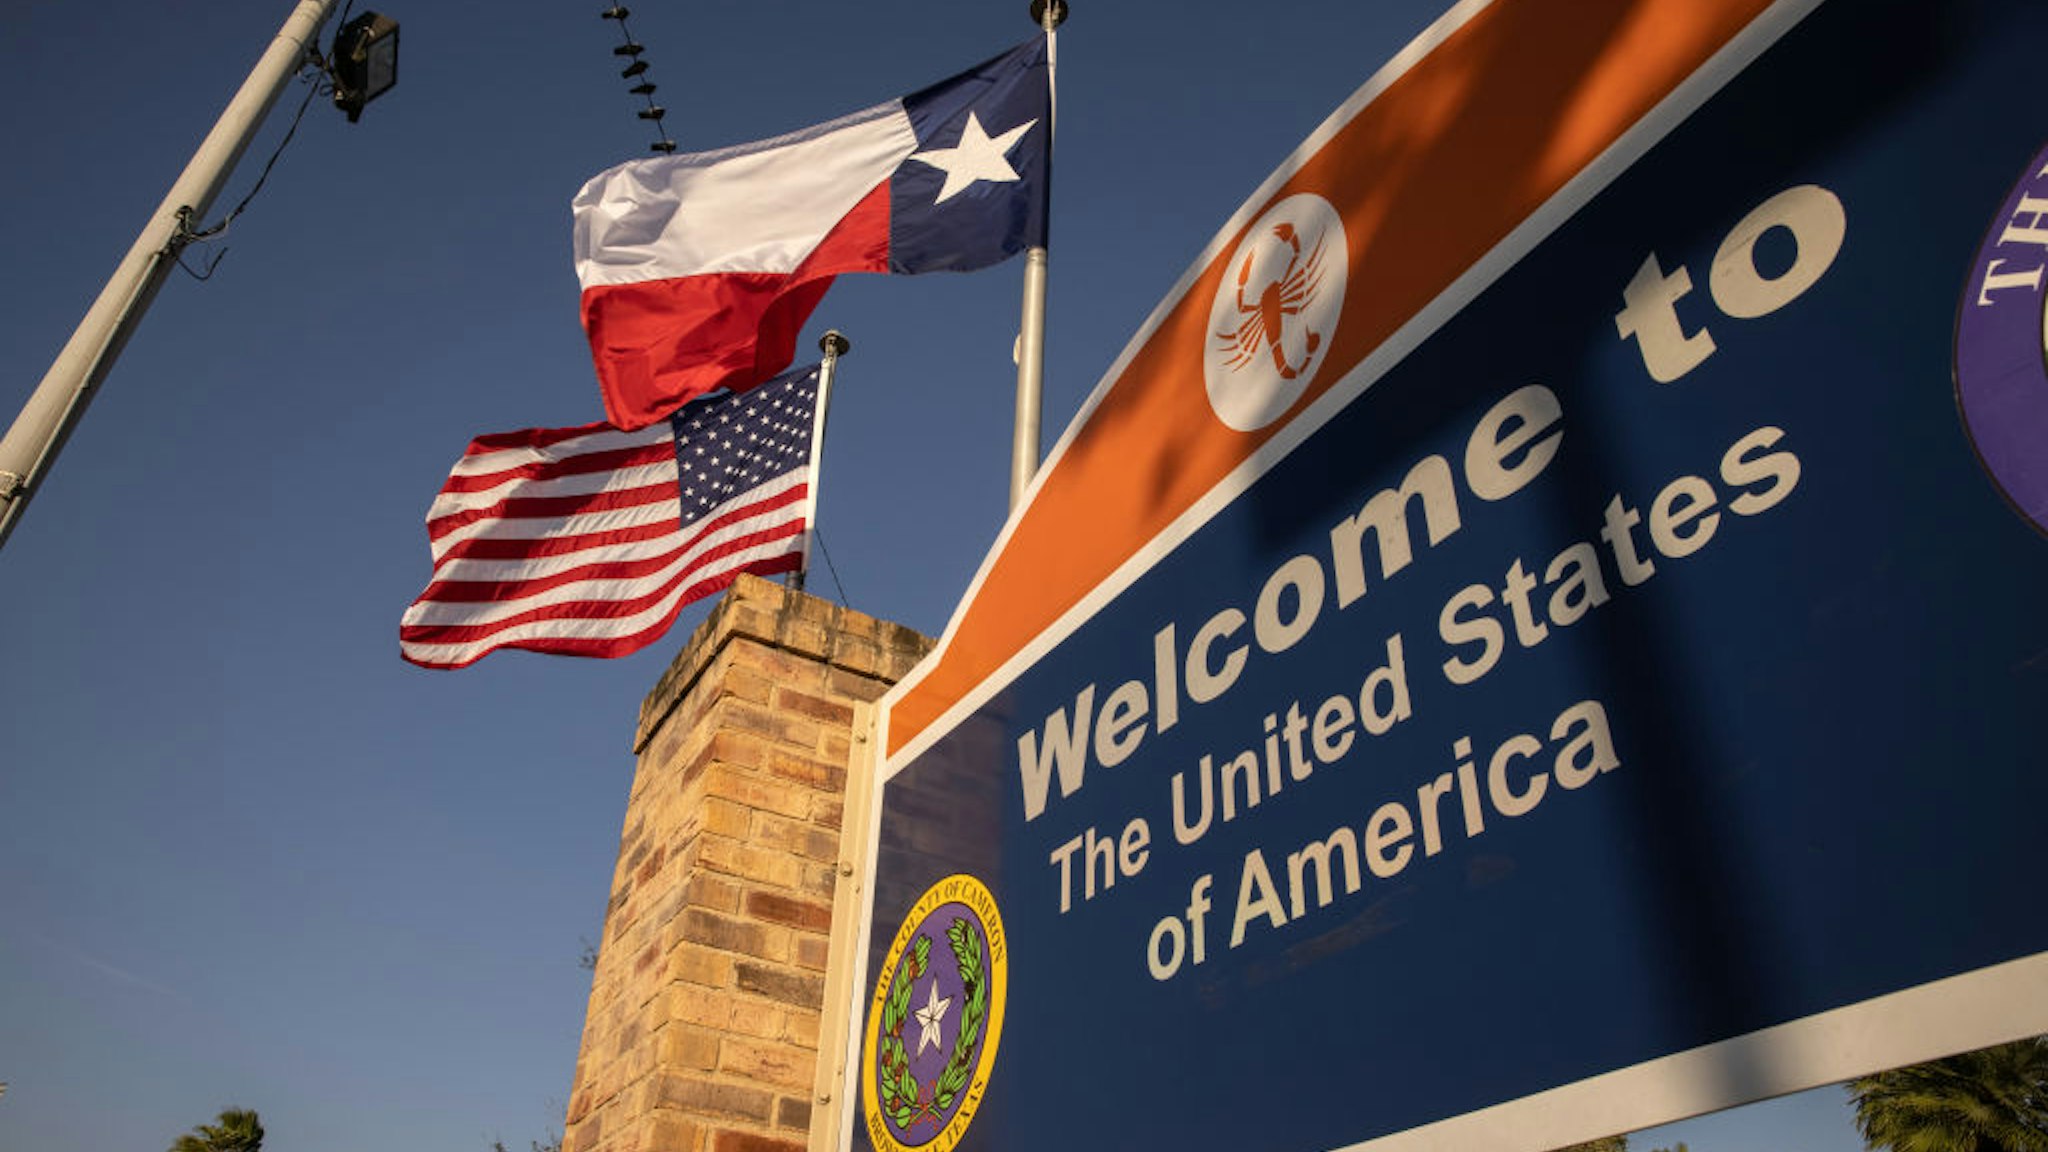 ROWNSVILLE, TEXAS - FEBRUARY 24: The U.S. and Texas flags fly near the U.S.-Mexico border on February 24, 2021 in Brownsville, Texas. (Photo by John Moore/Getty Images)